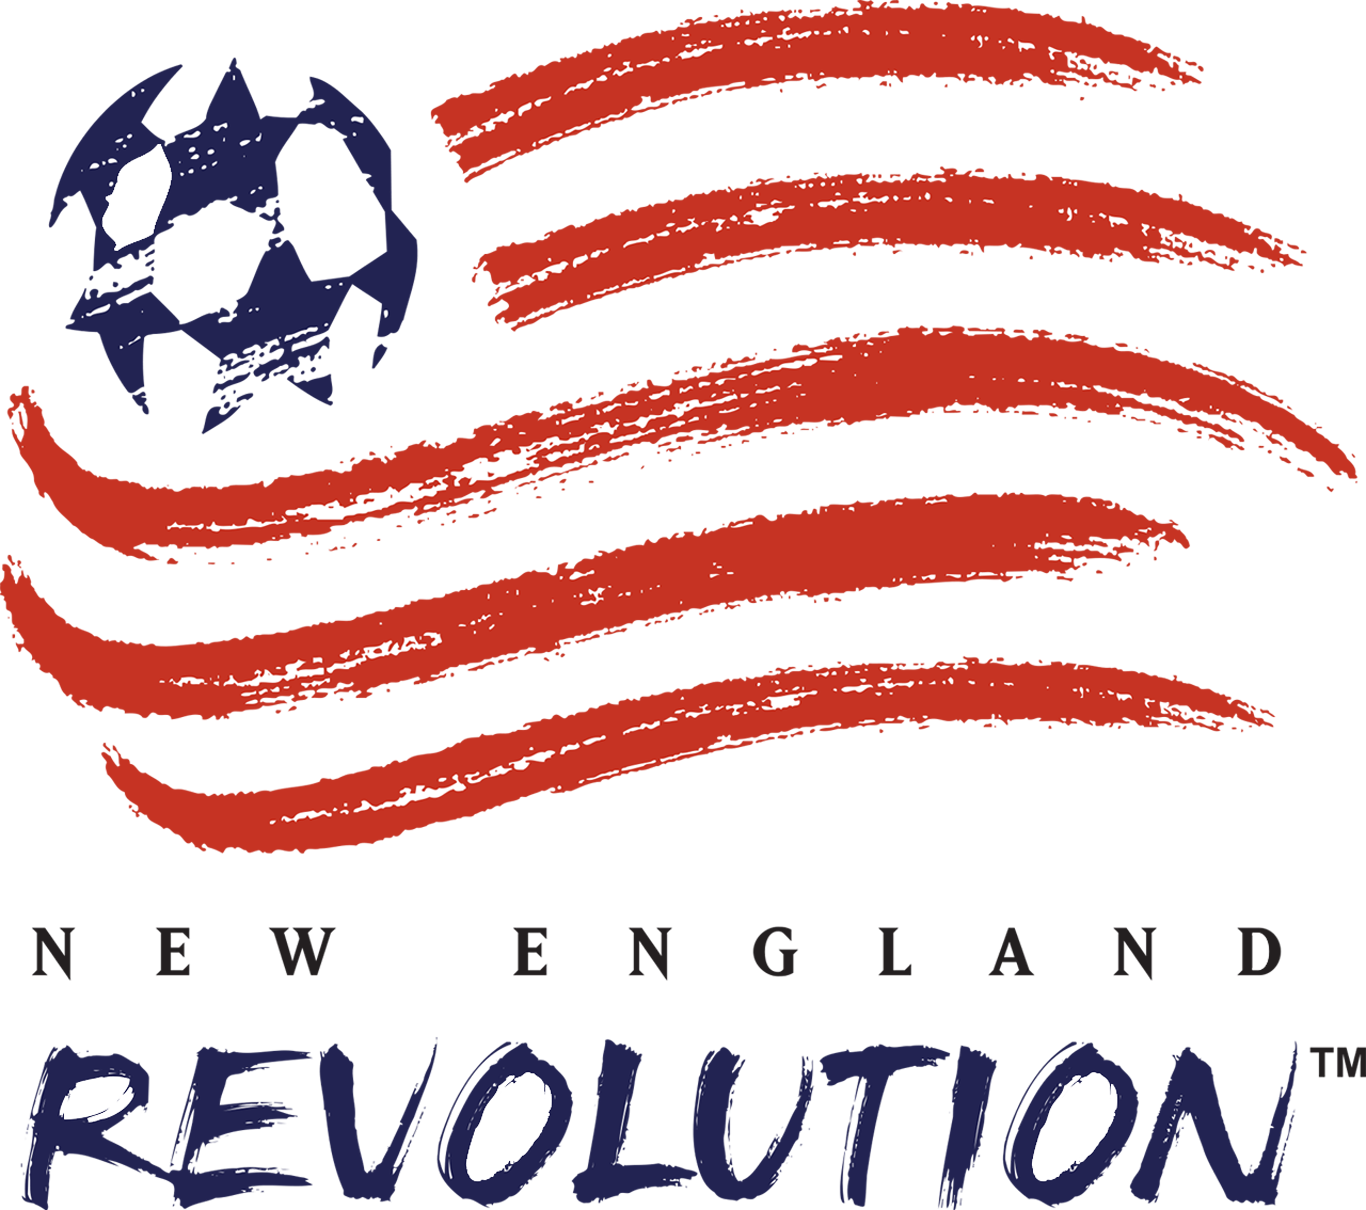 new england revolution logo render wallpaper Football Pictures and